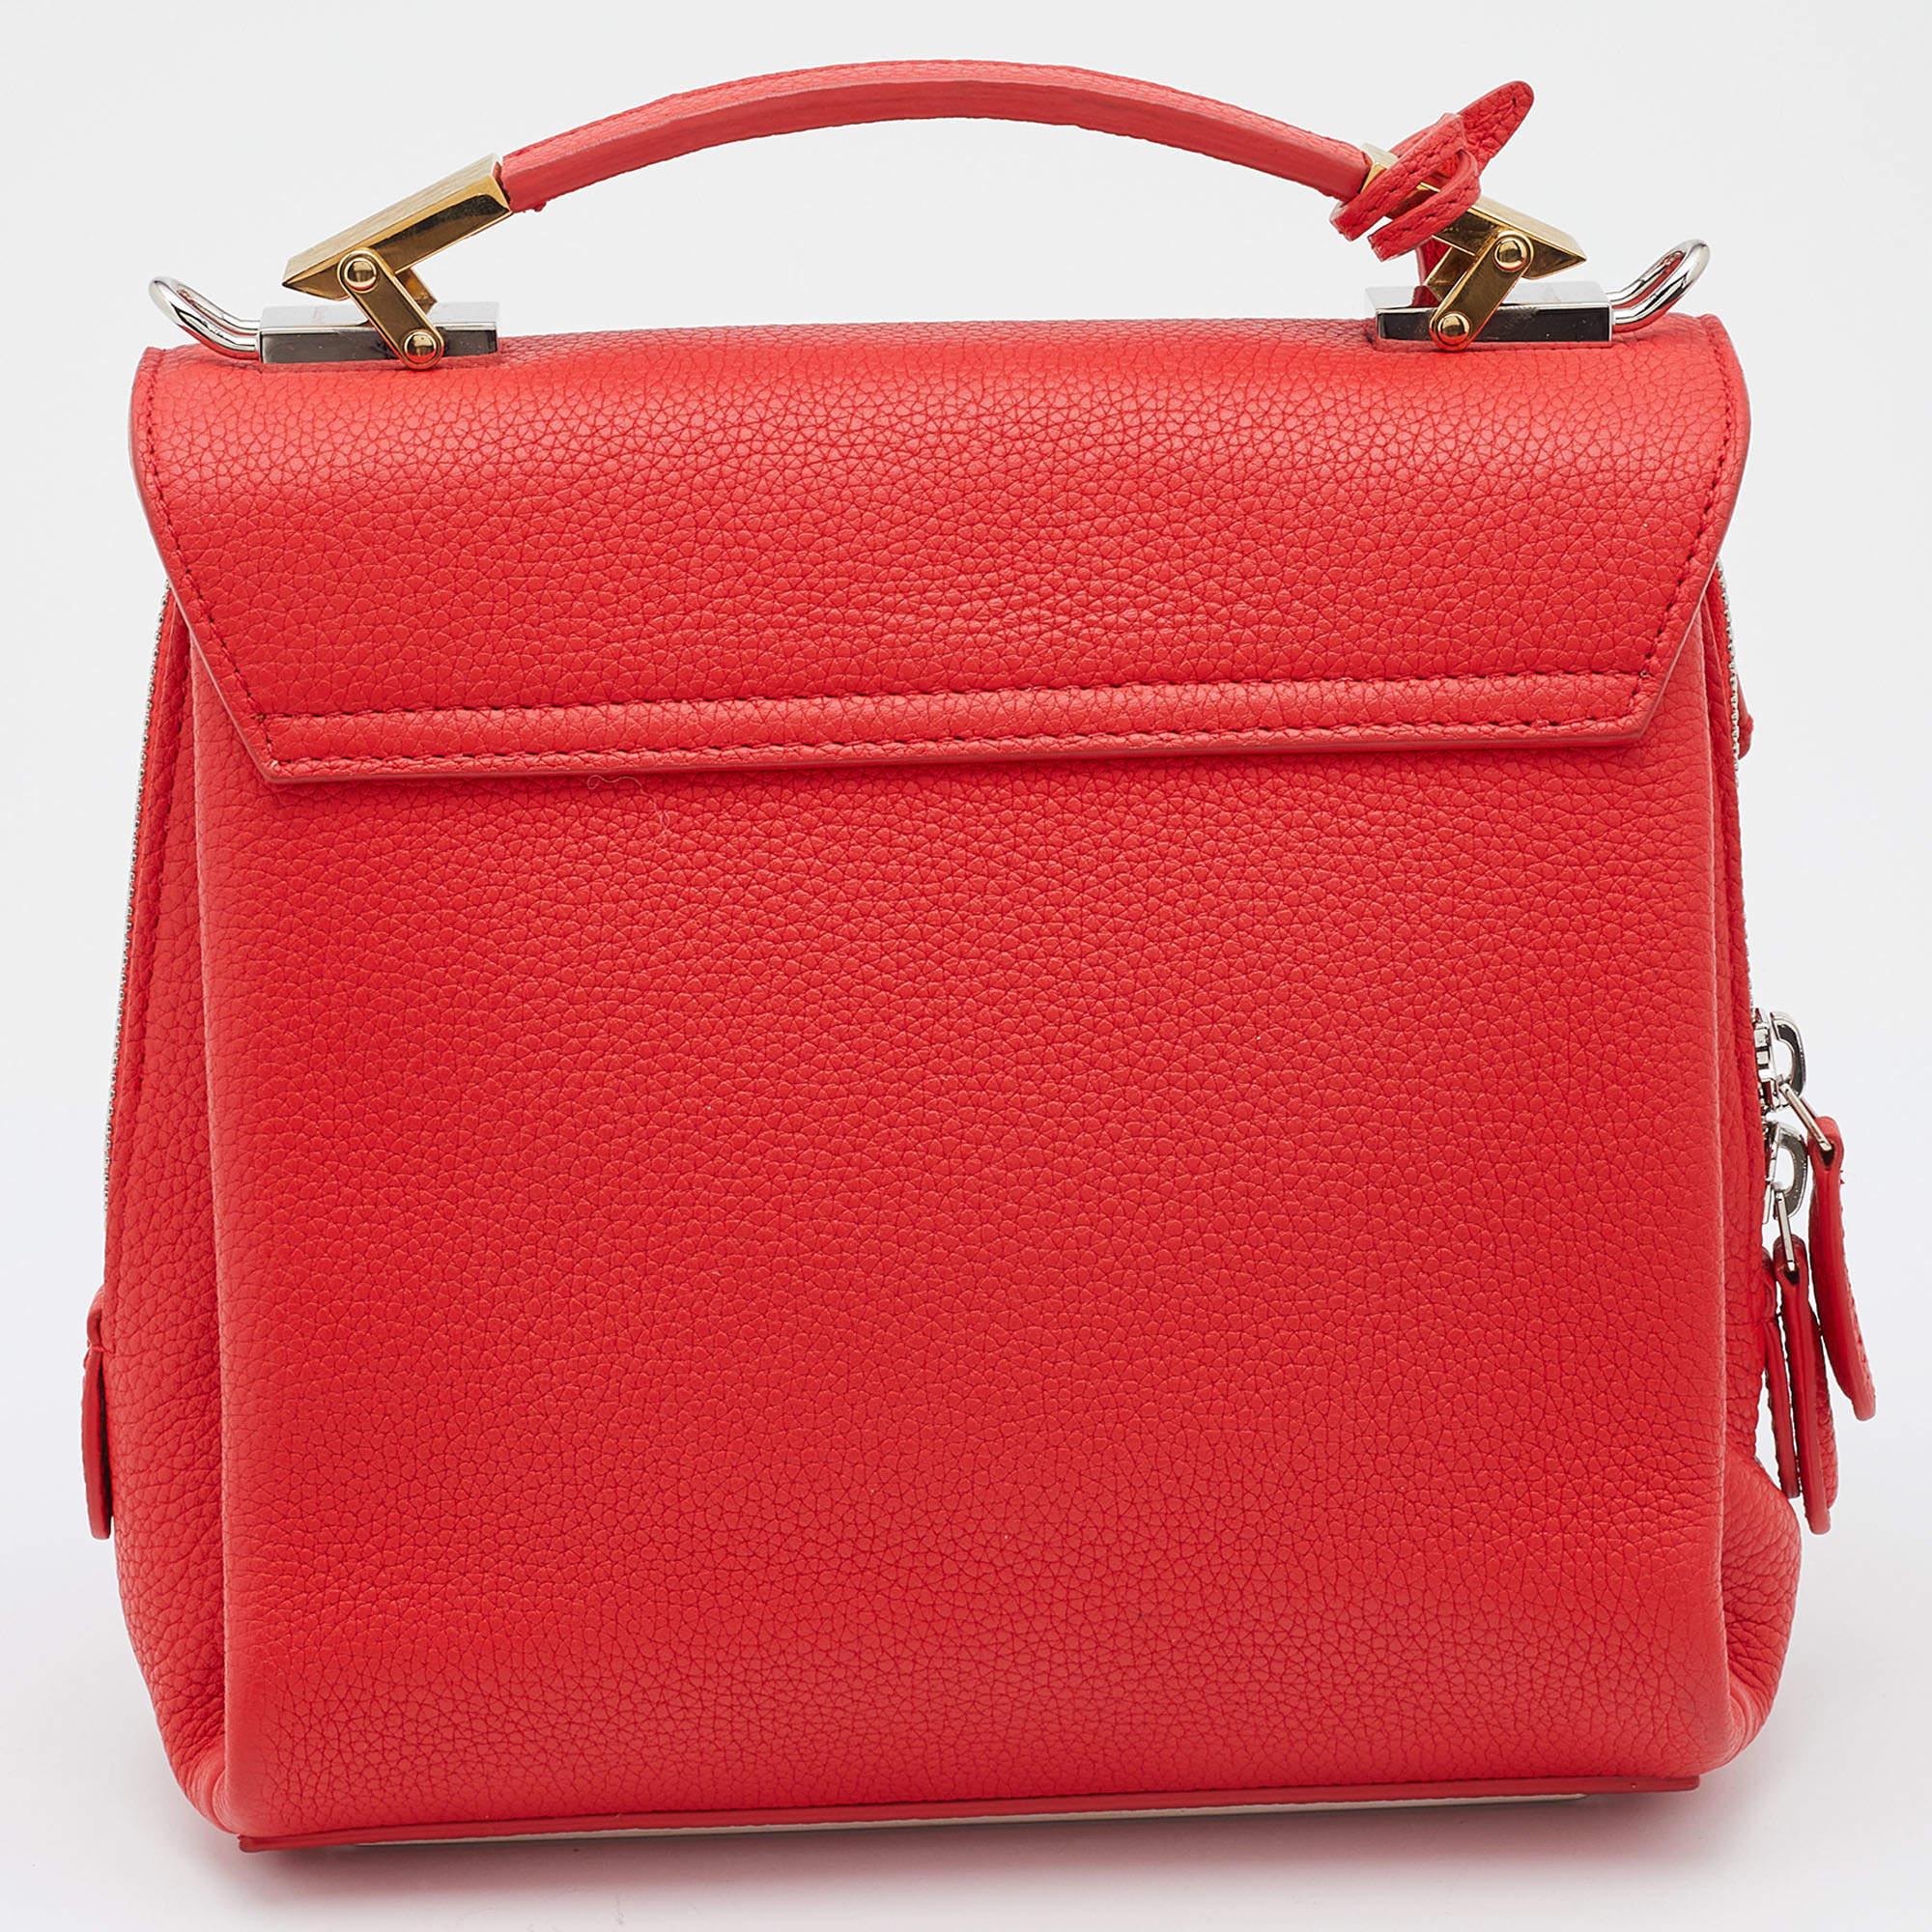 This Balenciaga design exudes luxury and beauty! It comes crafted from leather and added with a front flap, and a top handle. The rose hue gives the exterior a fresh look, and the long strap allows shoulder as well as crossbody wear.

Includes: Info